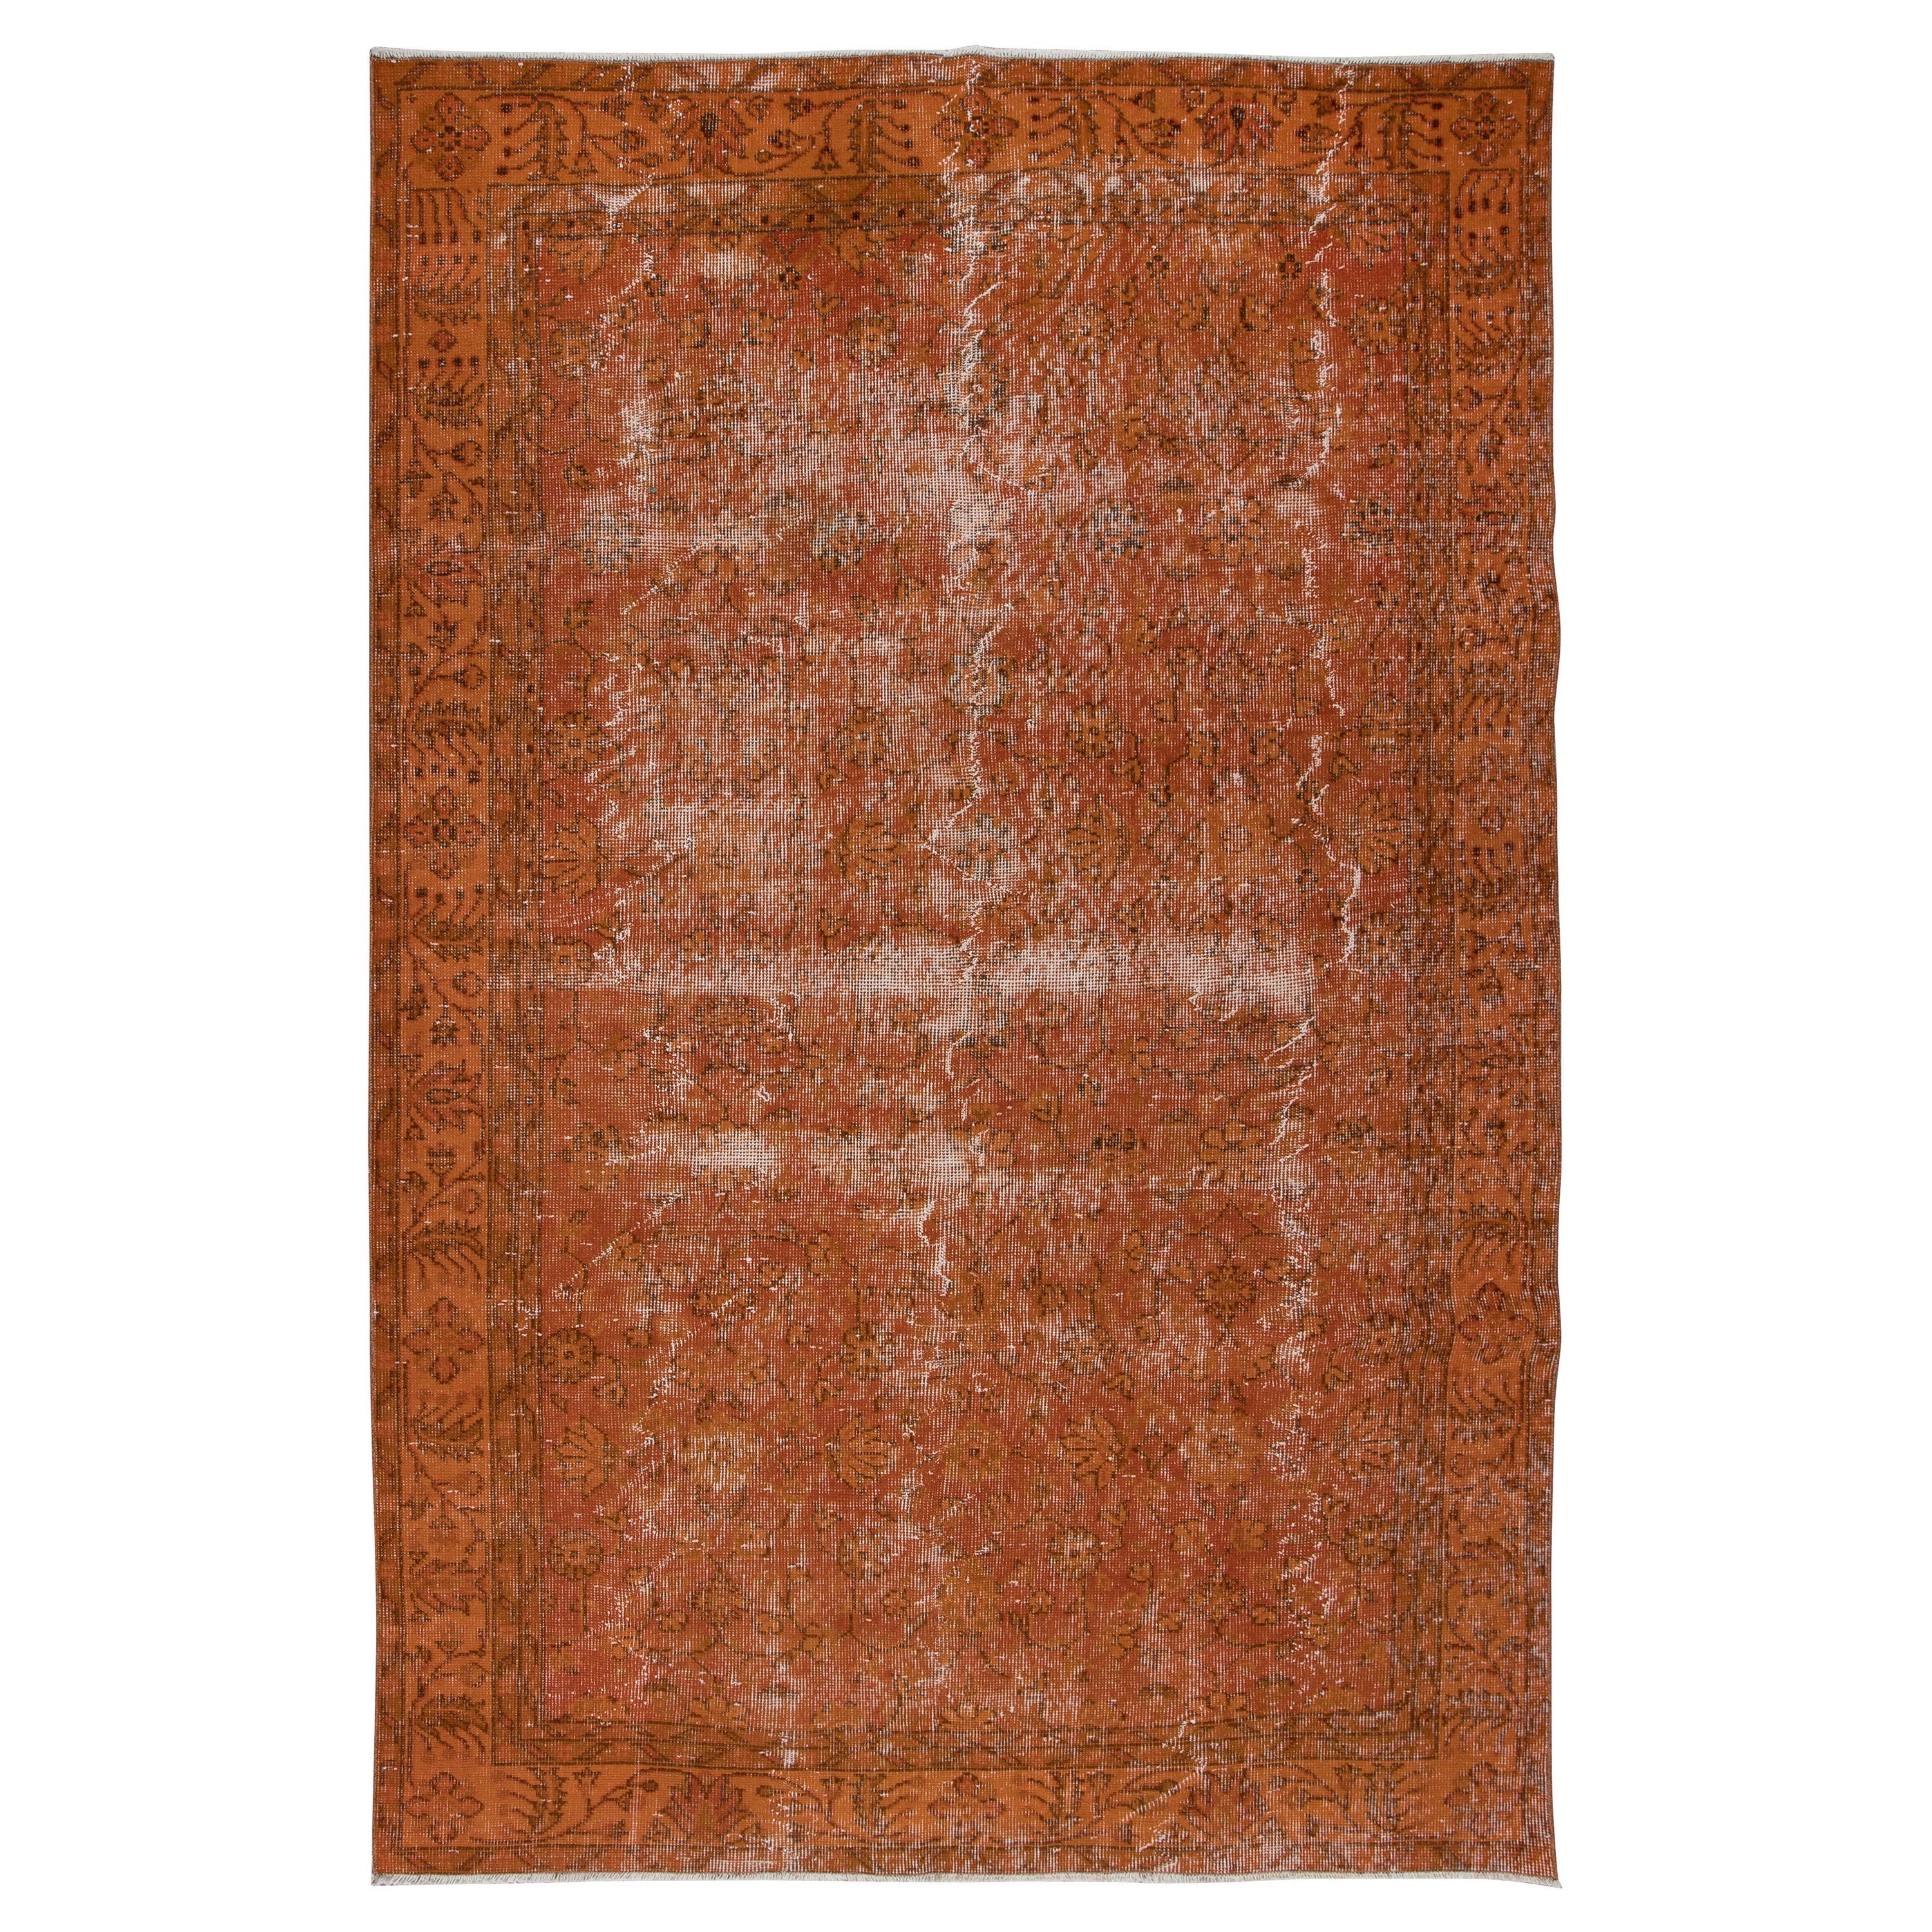 5.8x8.7 Ft Decorative Handmade Turkish Area Rug in Orange with Shabby Chic Style For Sale